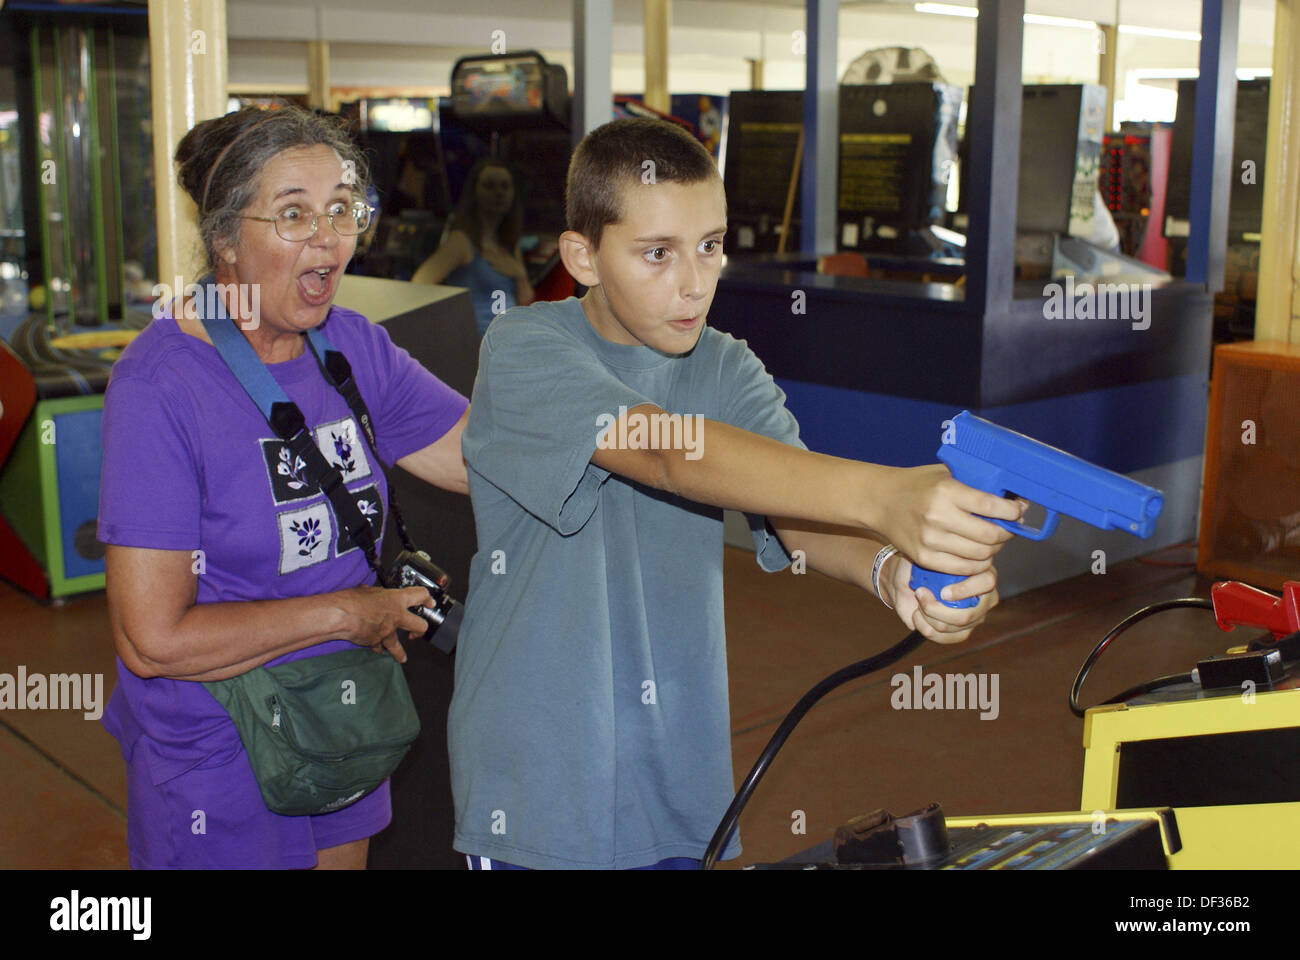 Woman excited by grandson´s accuracy at a game in an arcade. Stock Photo